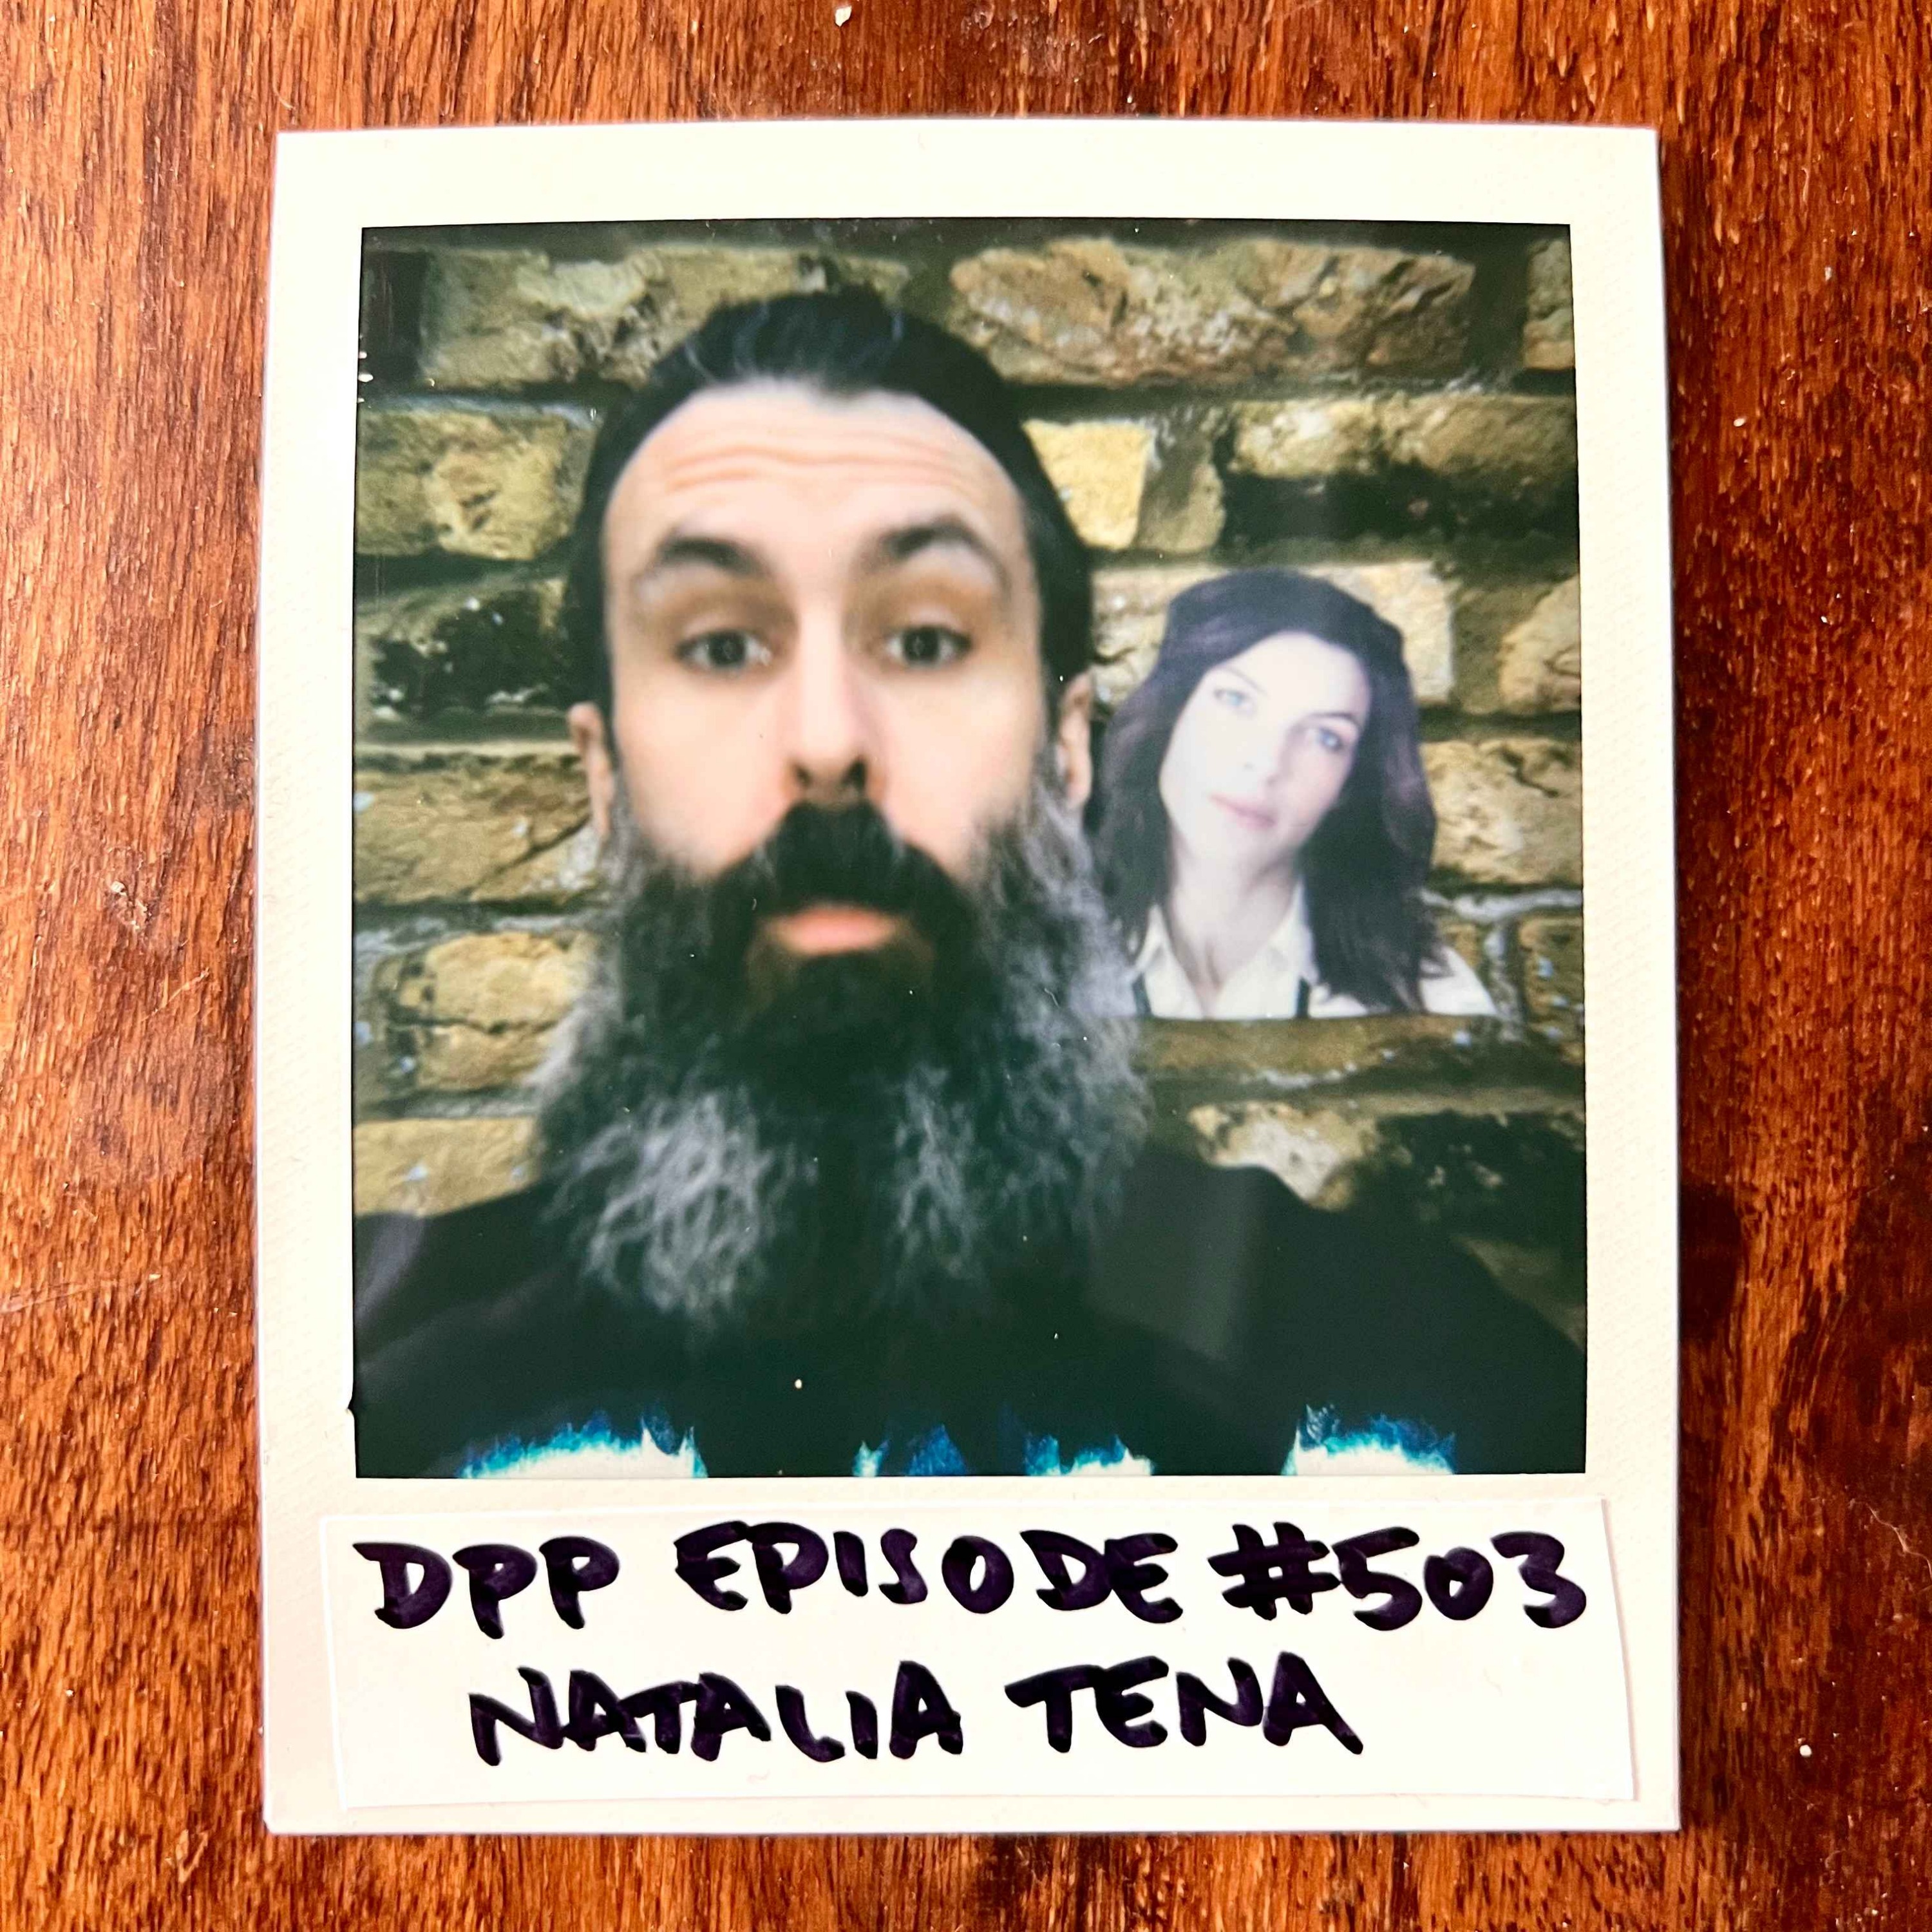 Natalia Tena • Distraction Pieces Podcast with Scroobius Pip #503